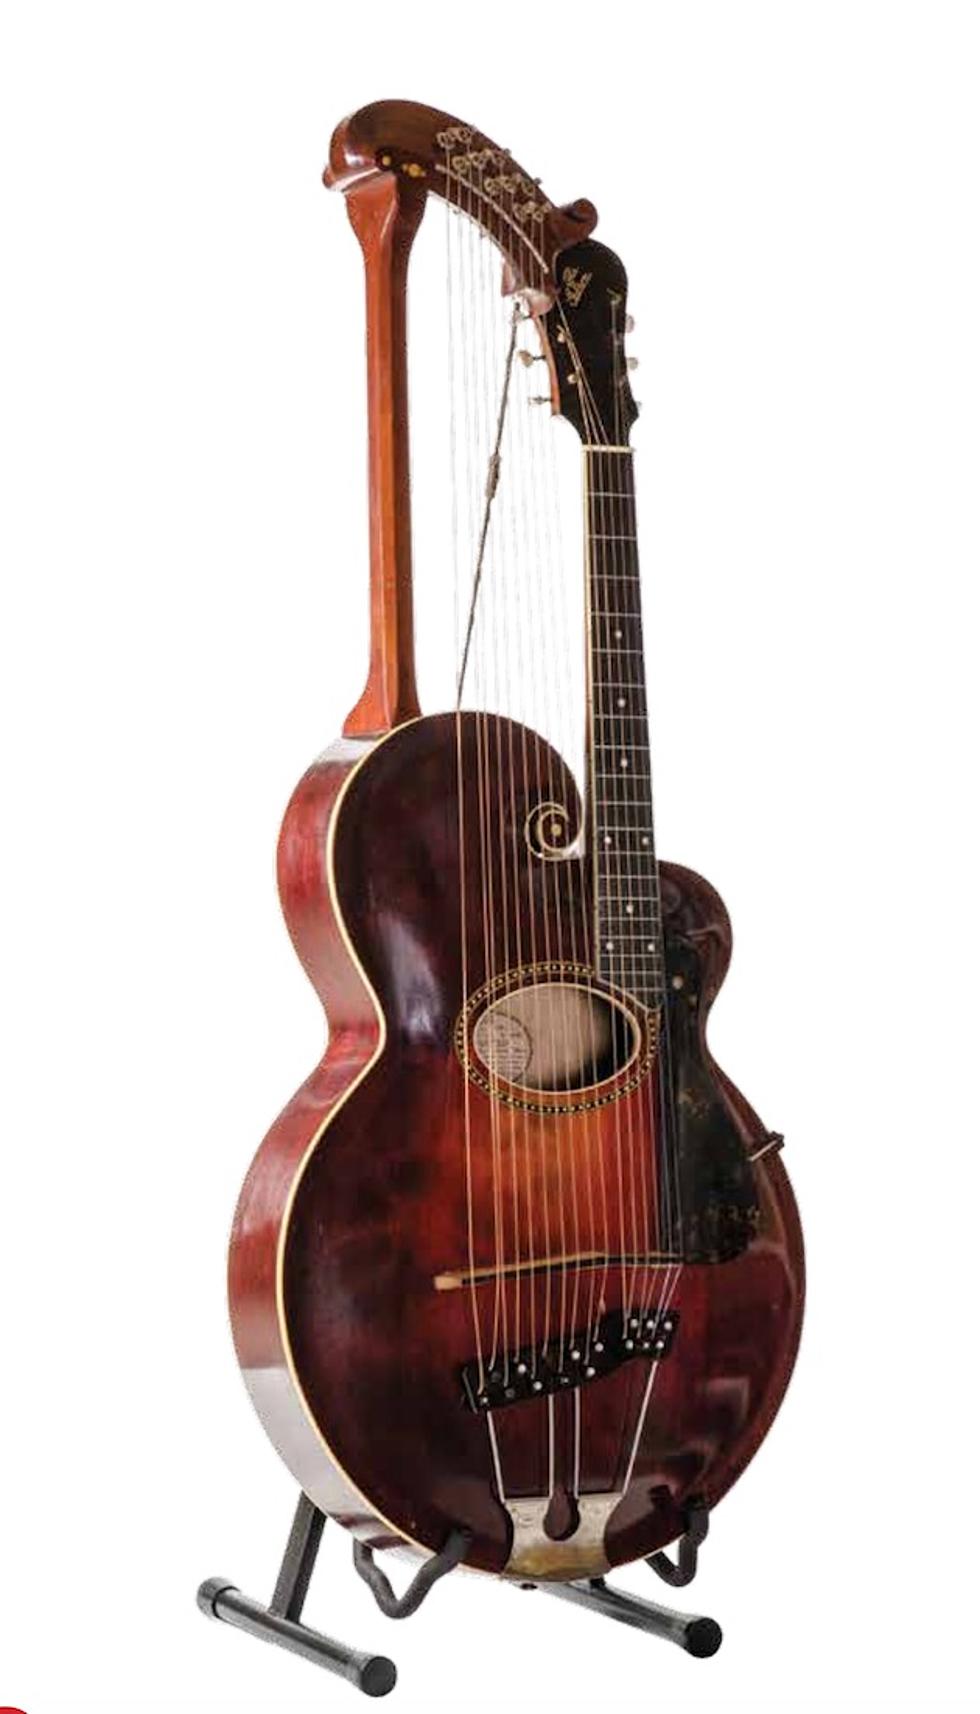 rare guitar and memorabilia auction coming to NYC this month